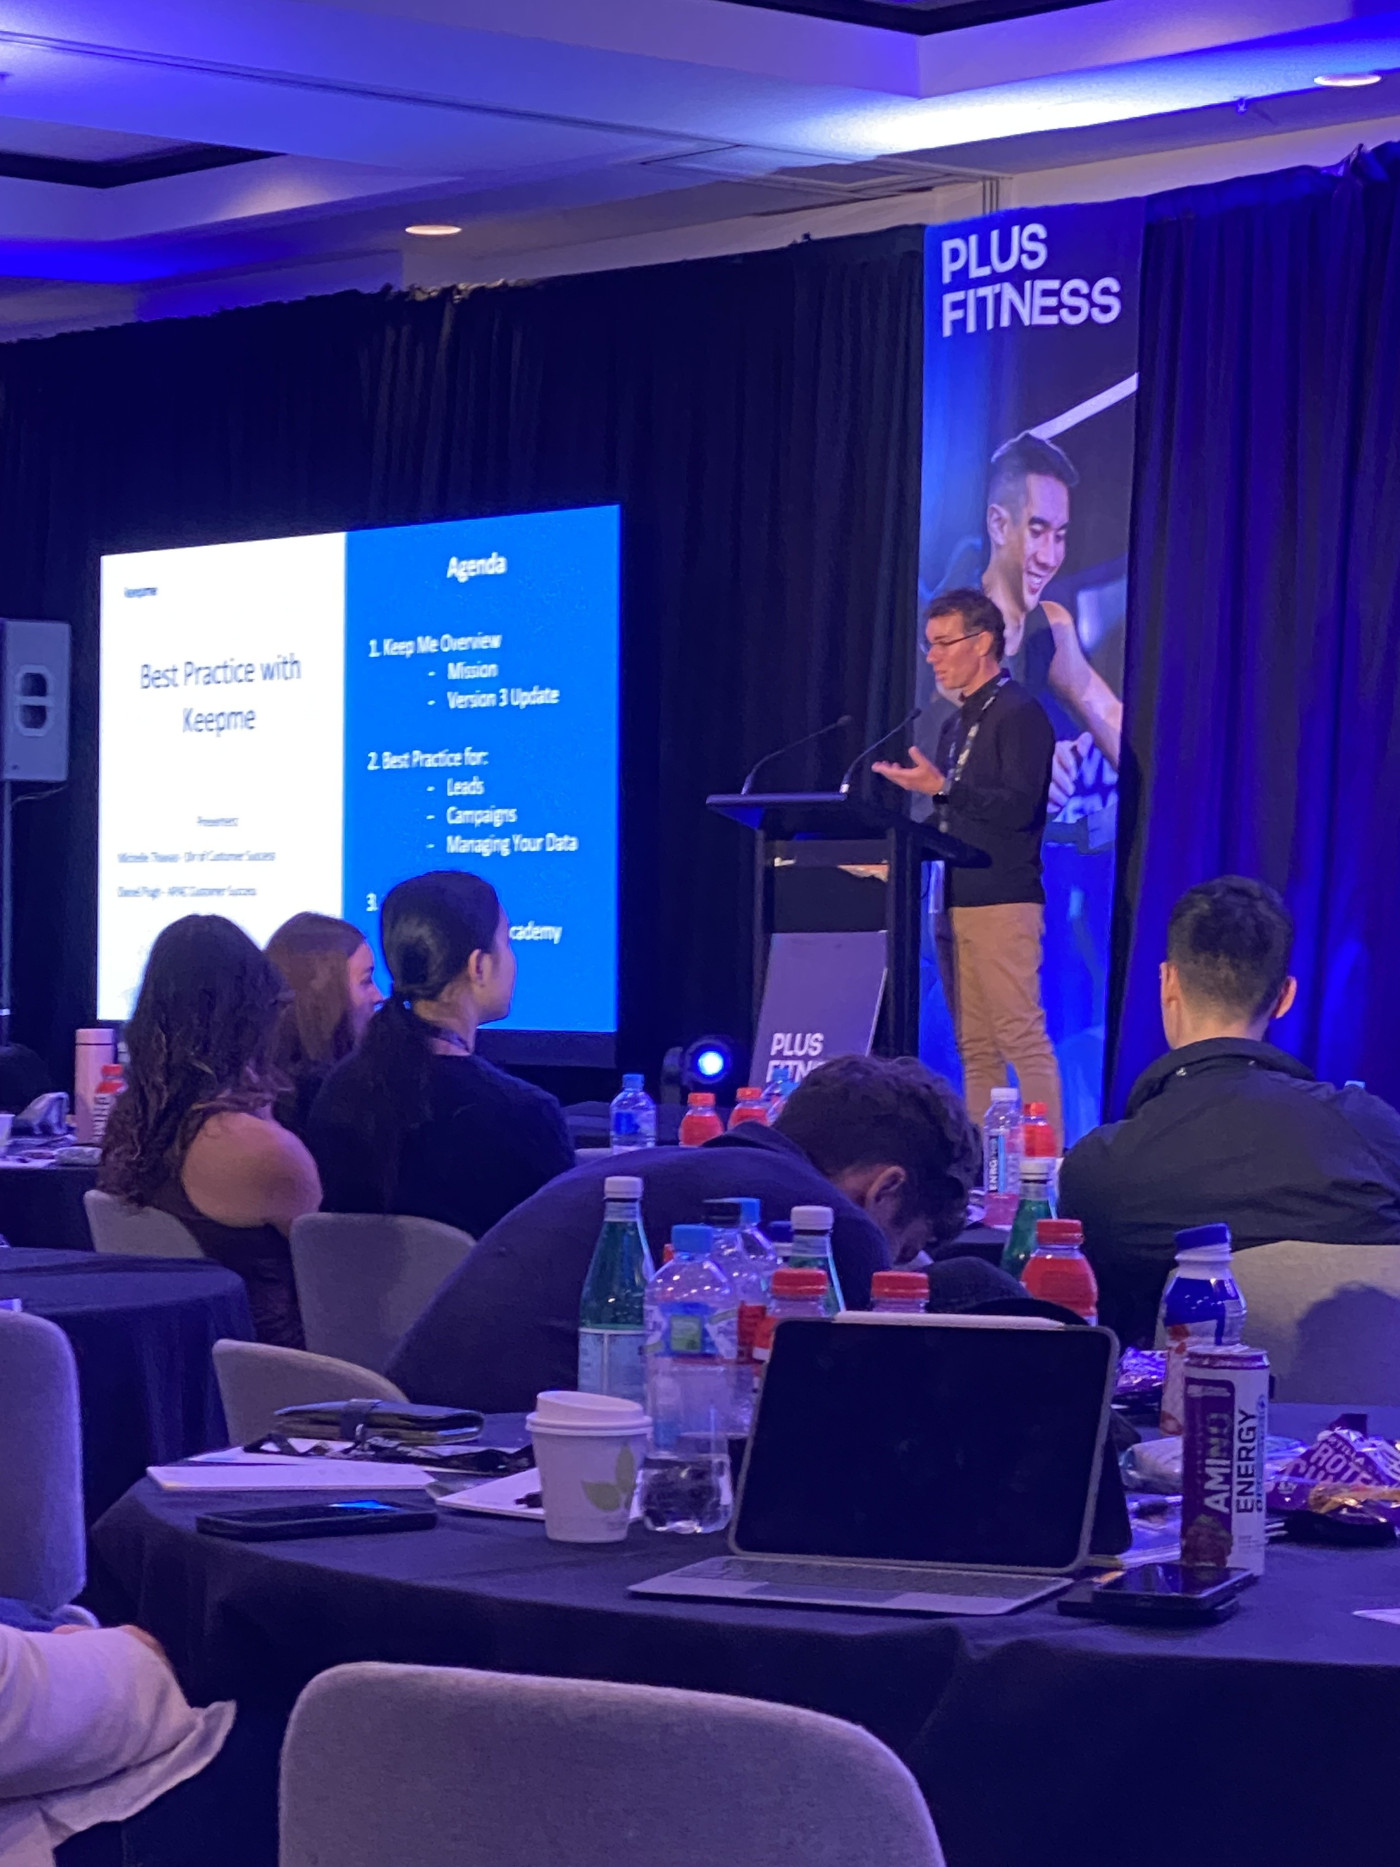 Keepme Customer Success Team Shines as Gold Sponsor at Plus Fitness Event